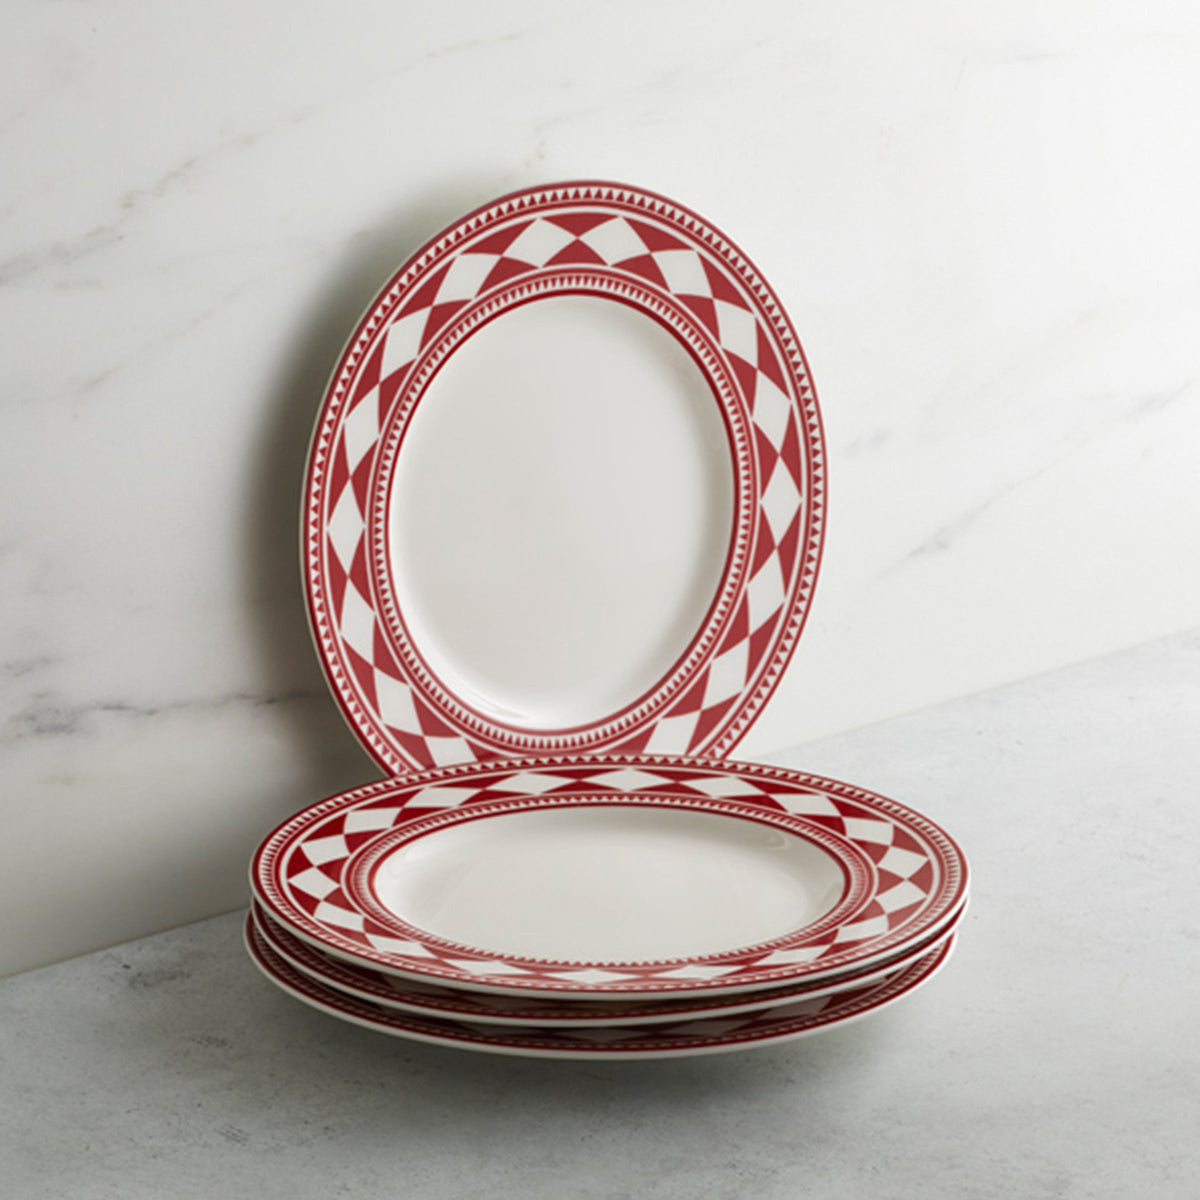 A set of Fez Crimson Salad Plates from the Caskata Artisanal Home Geometrics Collection on a marble surface.